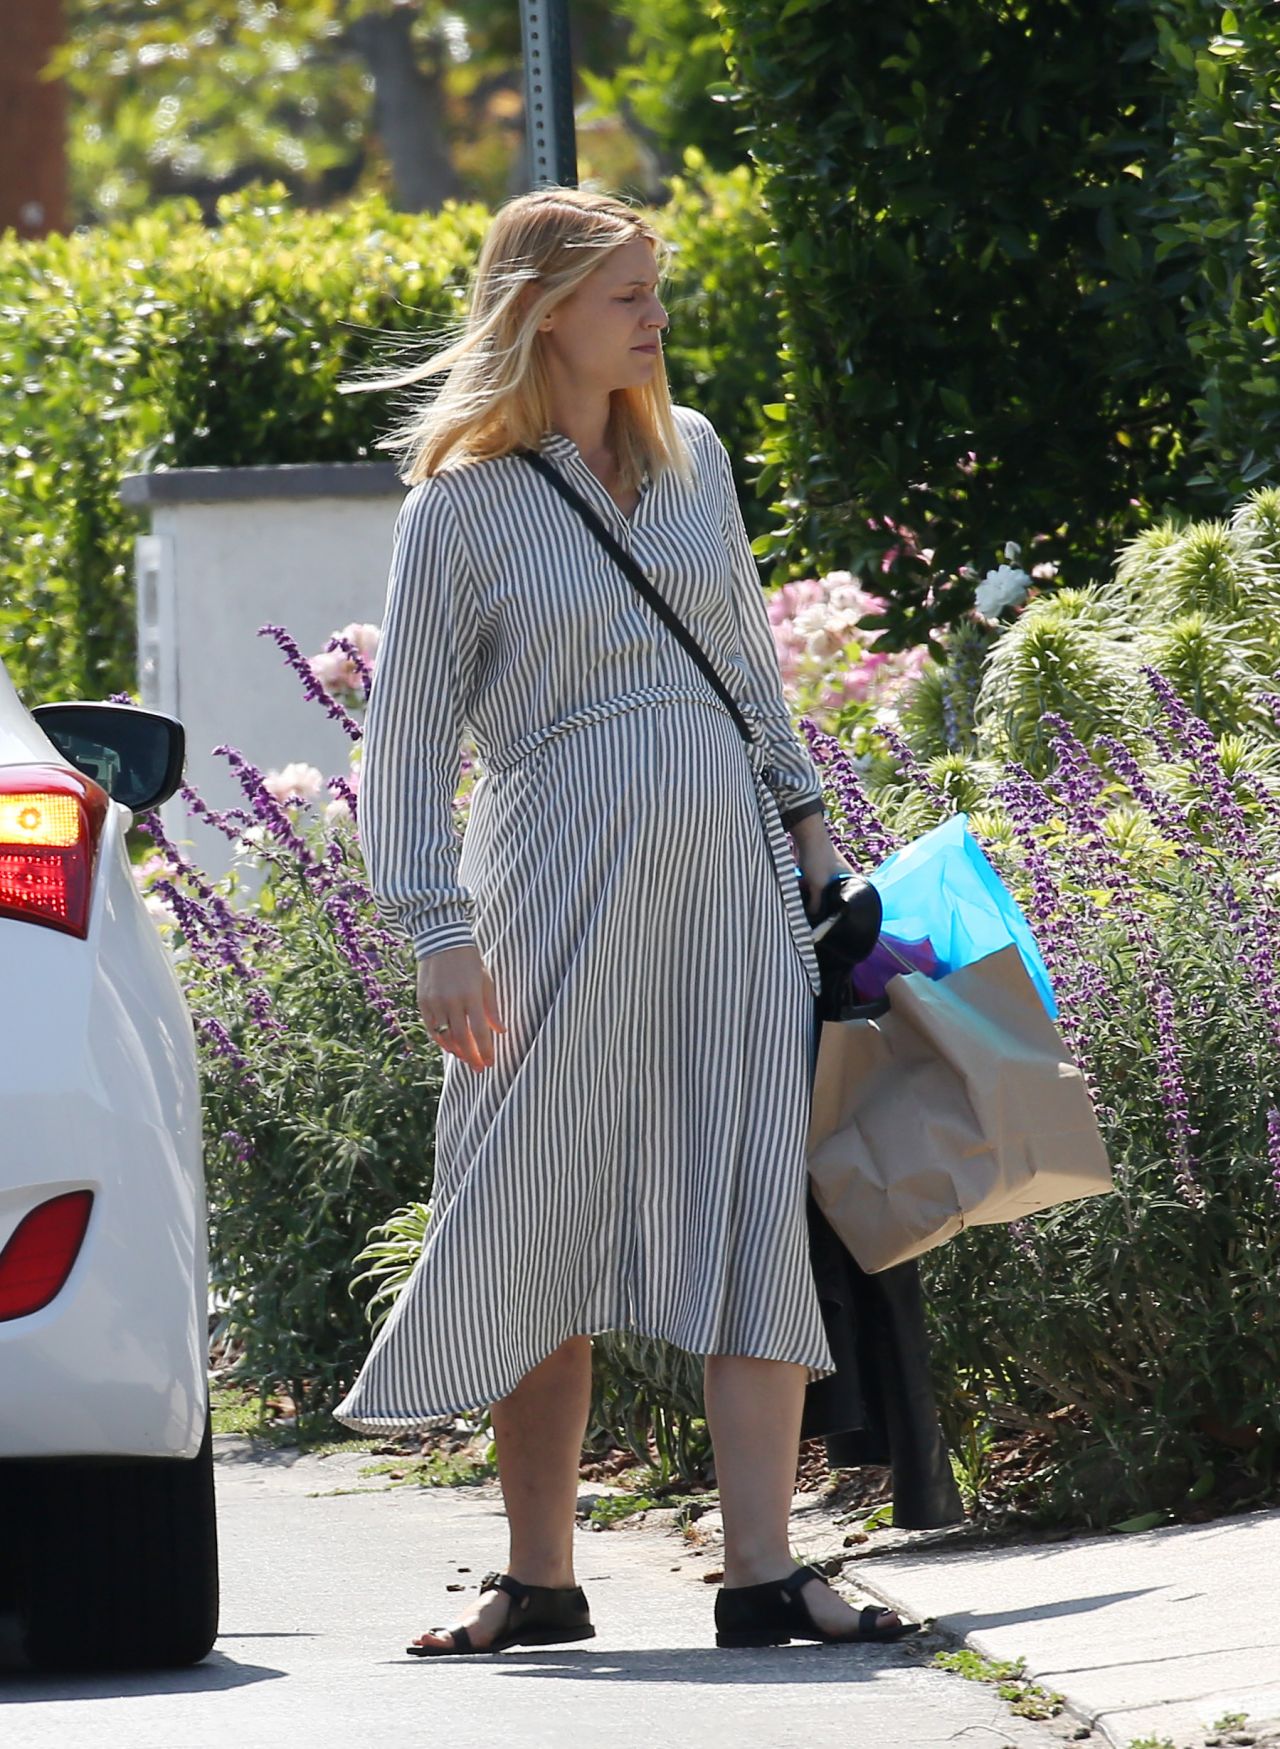 Claire Danes - Arrived Home by Uber in LA 06/07/2018.